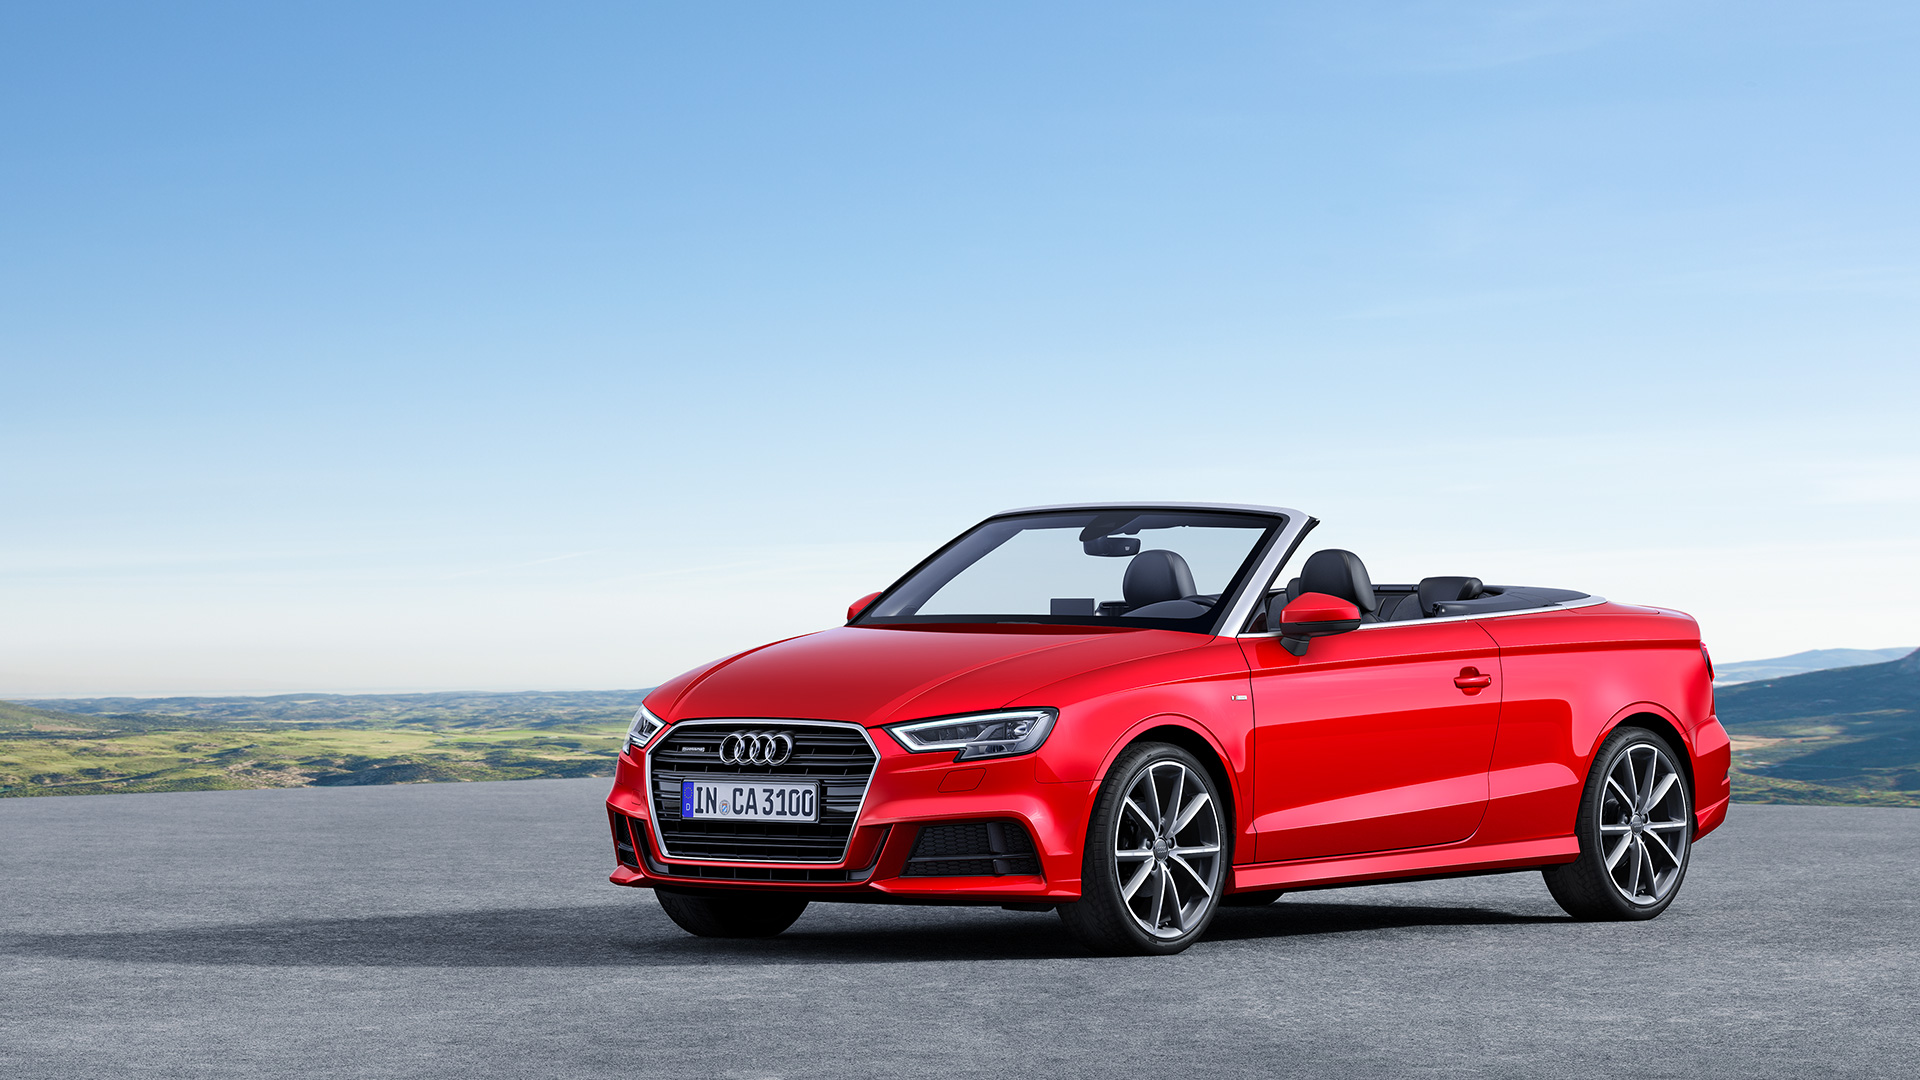 What are some accessories for the Audi A1 convertible?